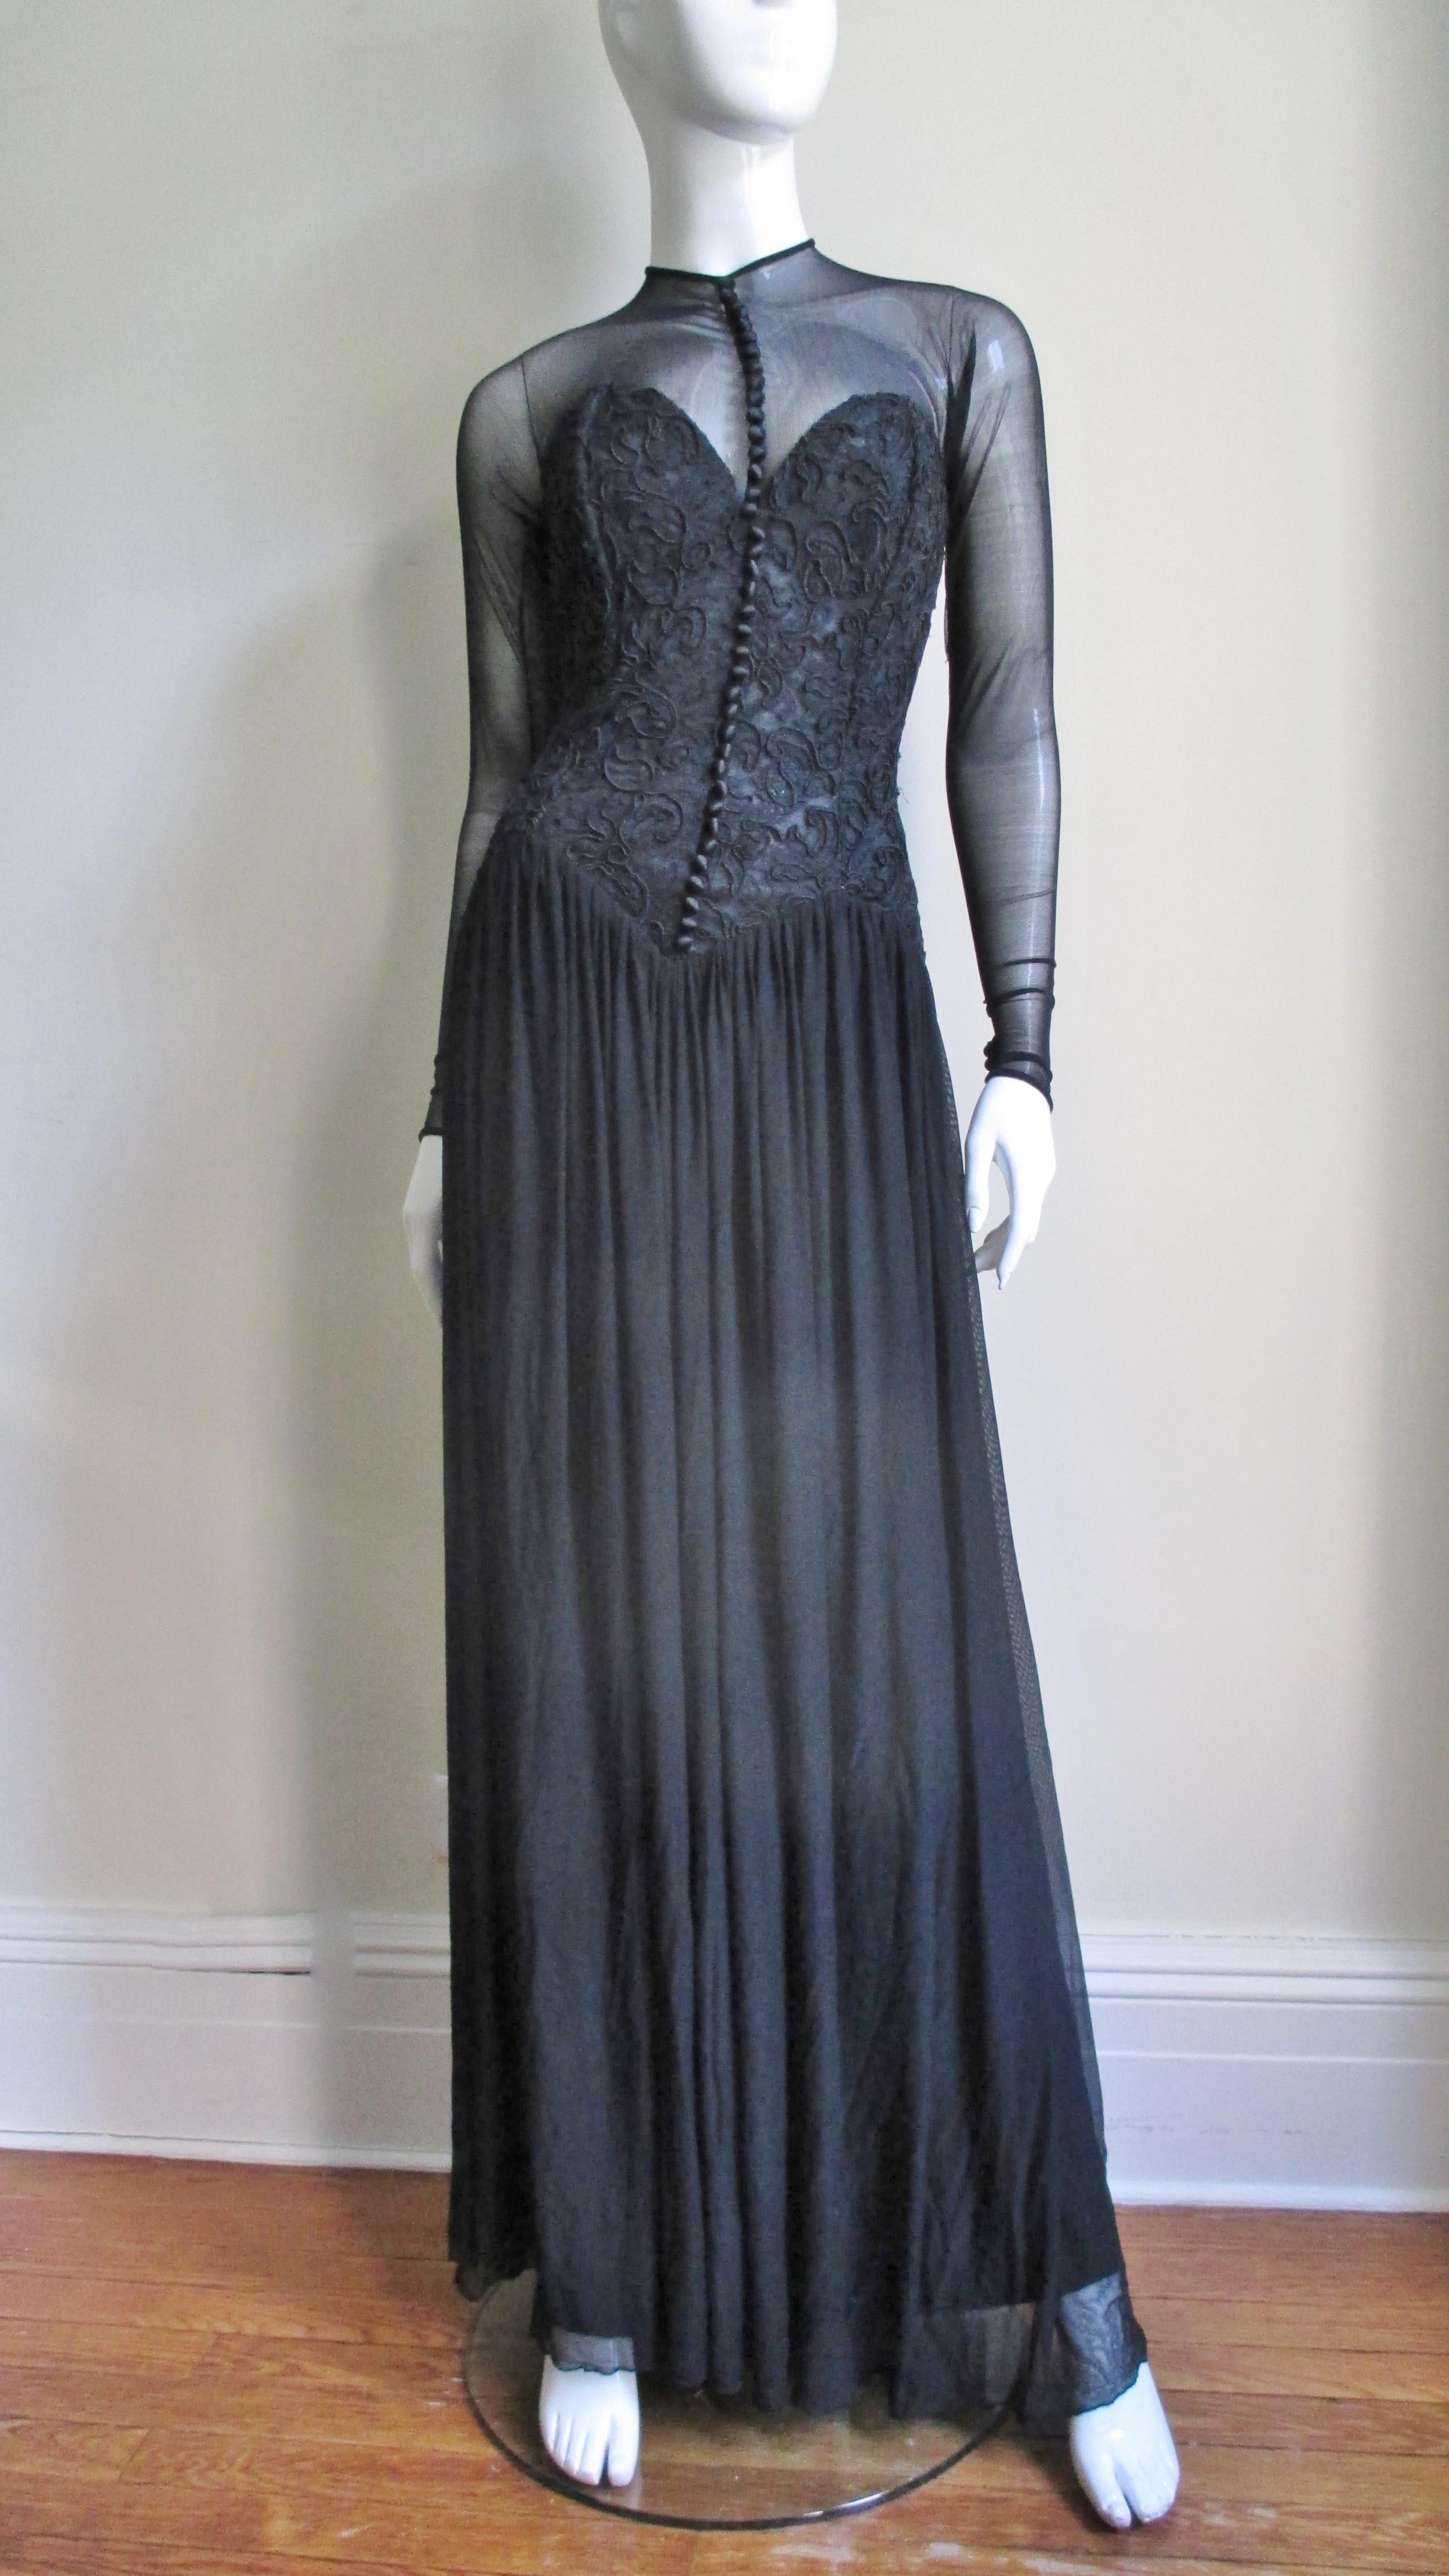 A fabulous black dress gown from Vicky Tiel Couture.  It has a fitted boned bustier bodice covered in an intricate corded lace pattern with numerous front silk buttons and loops and a full mesh skirt. The dress is striking with the sheer contrasting